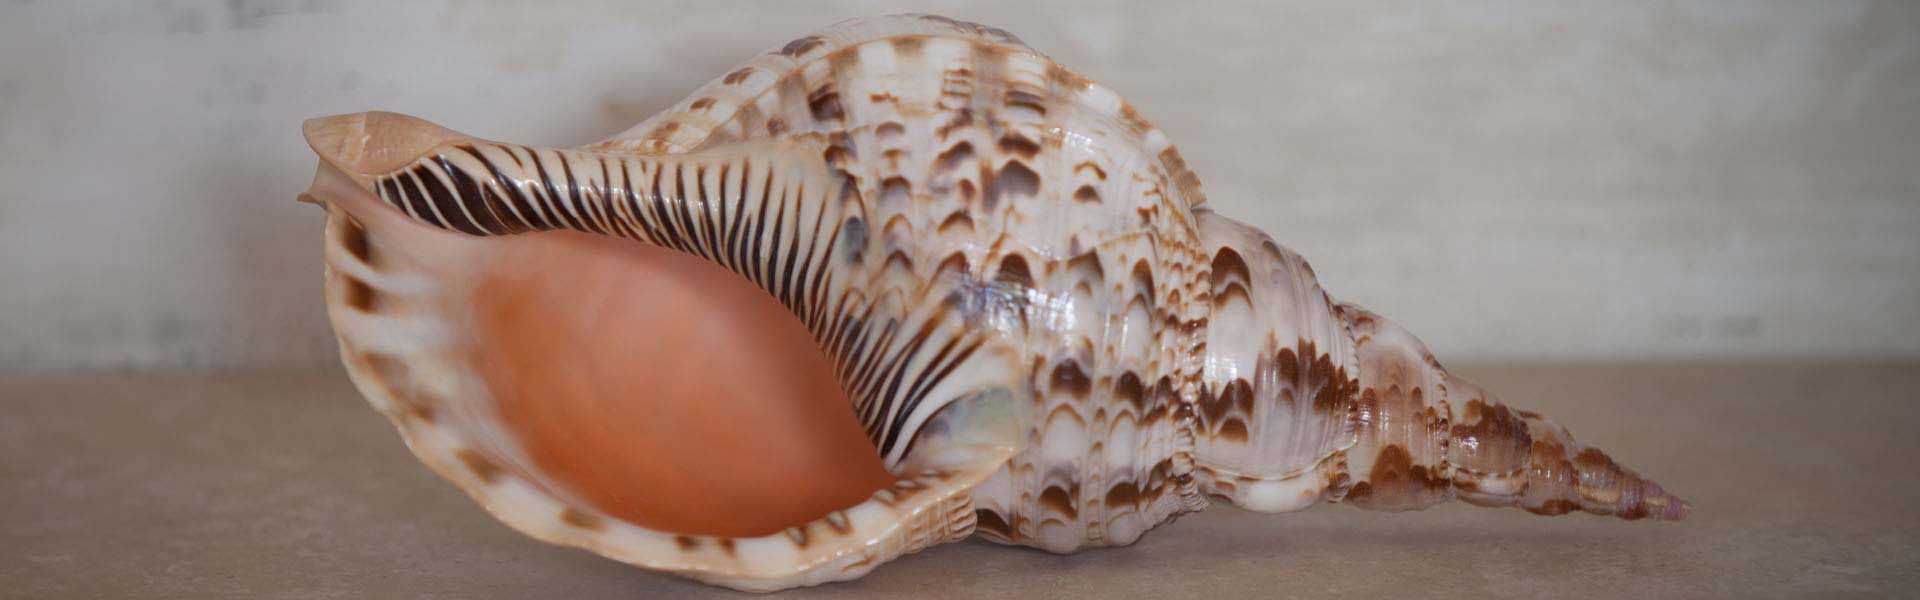 large shells for sale